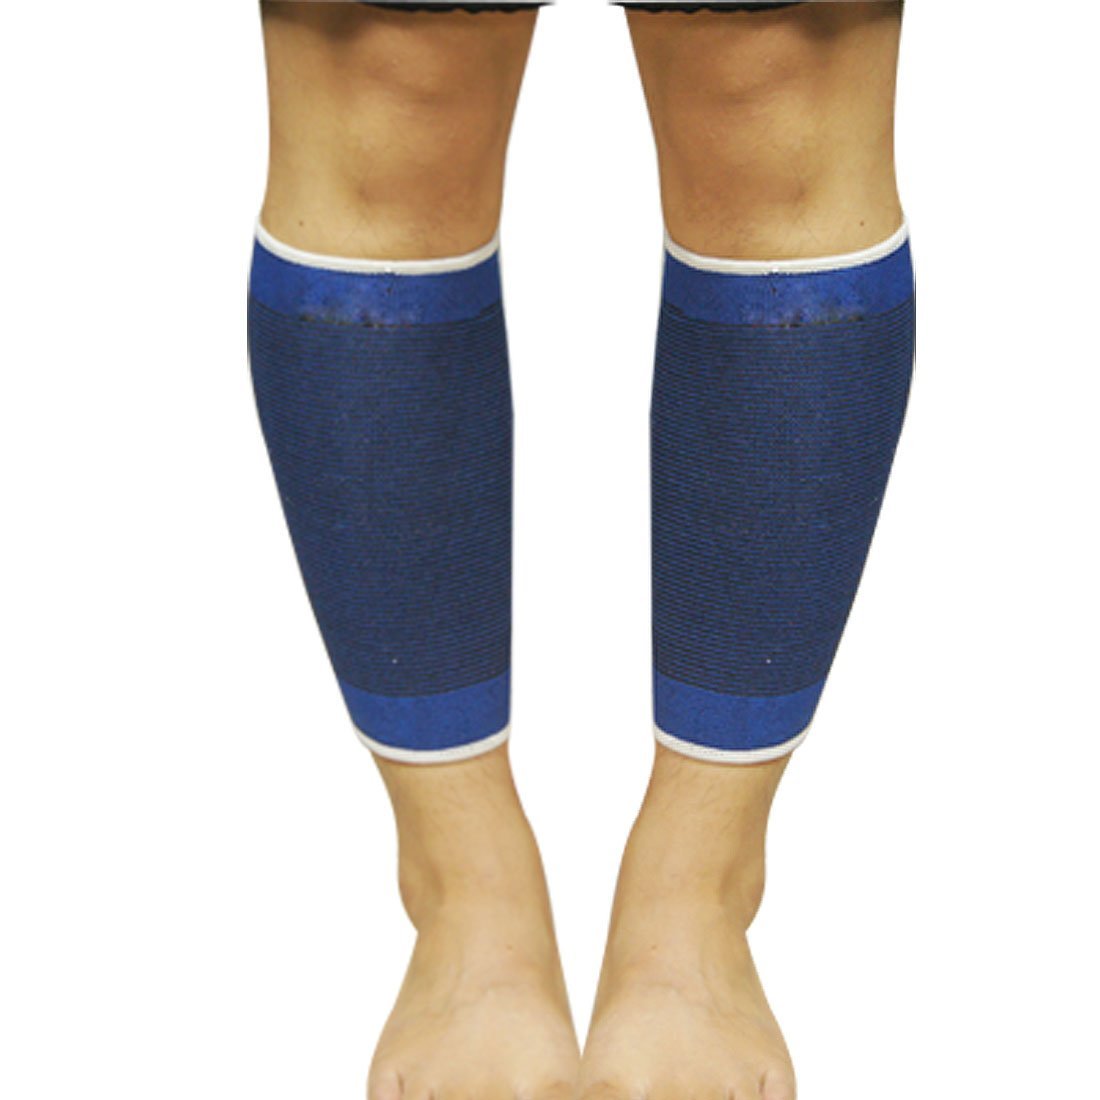 Shin guards Olympic weightlifting